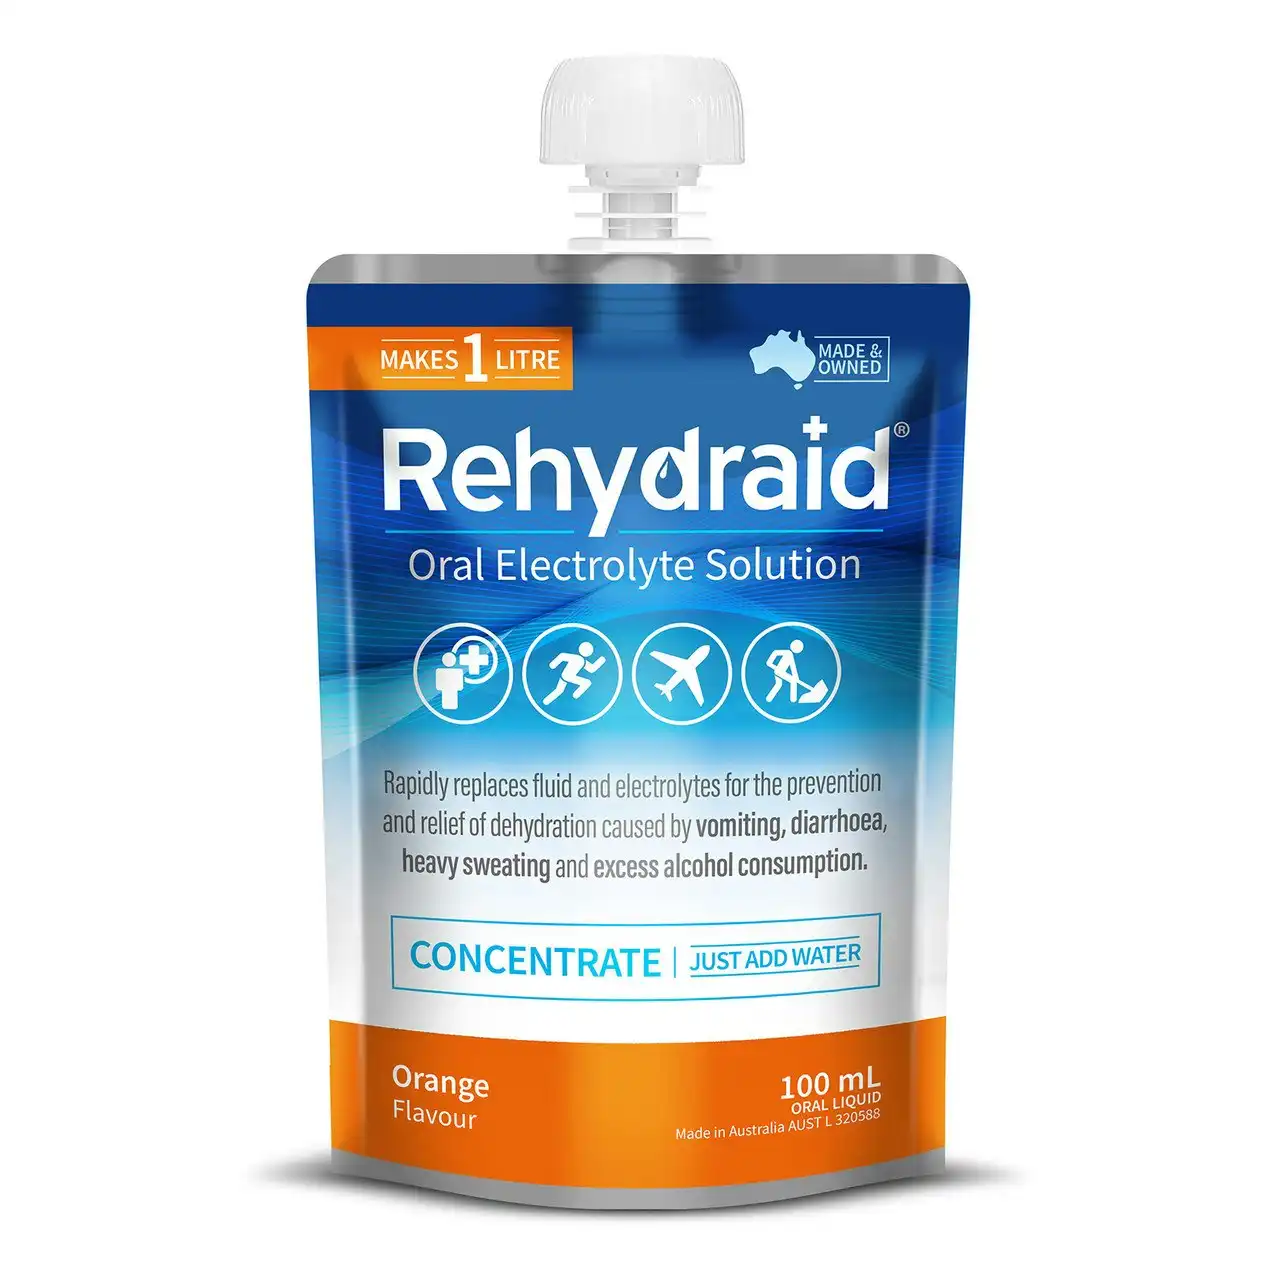 Rehydraid Concentrate Oral Electrolyte Solution Orange Flavour 100ml